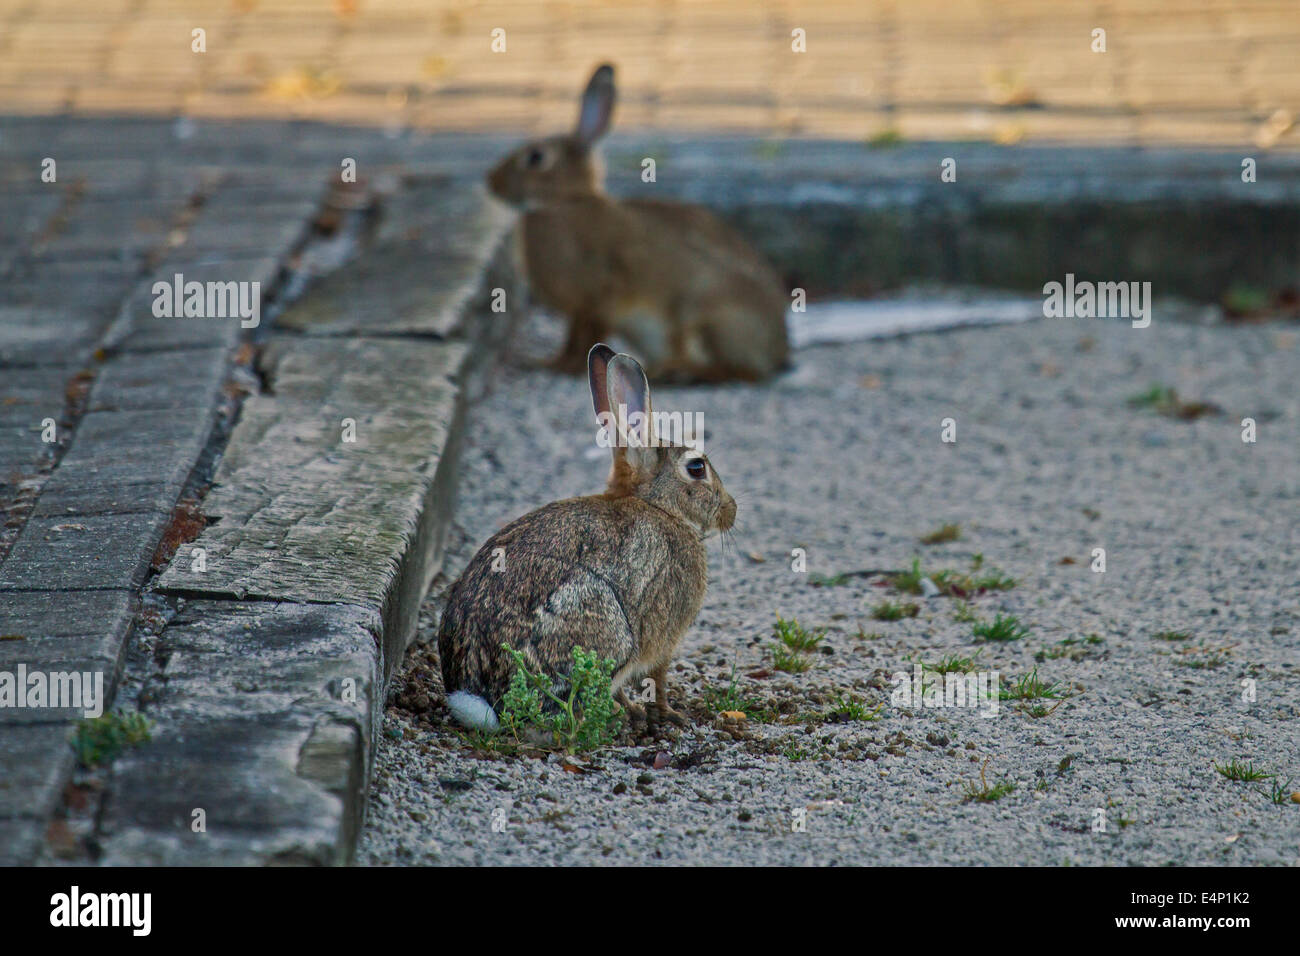 Two European rabbits / common rabbit (Oryctolagus cuniculus) sitting in the street Stock Photo